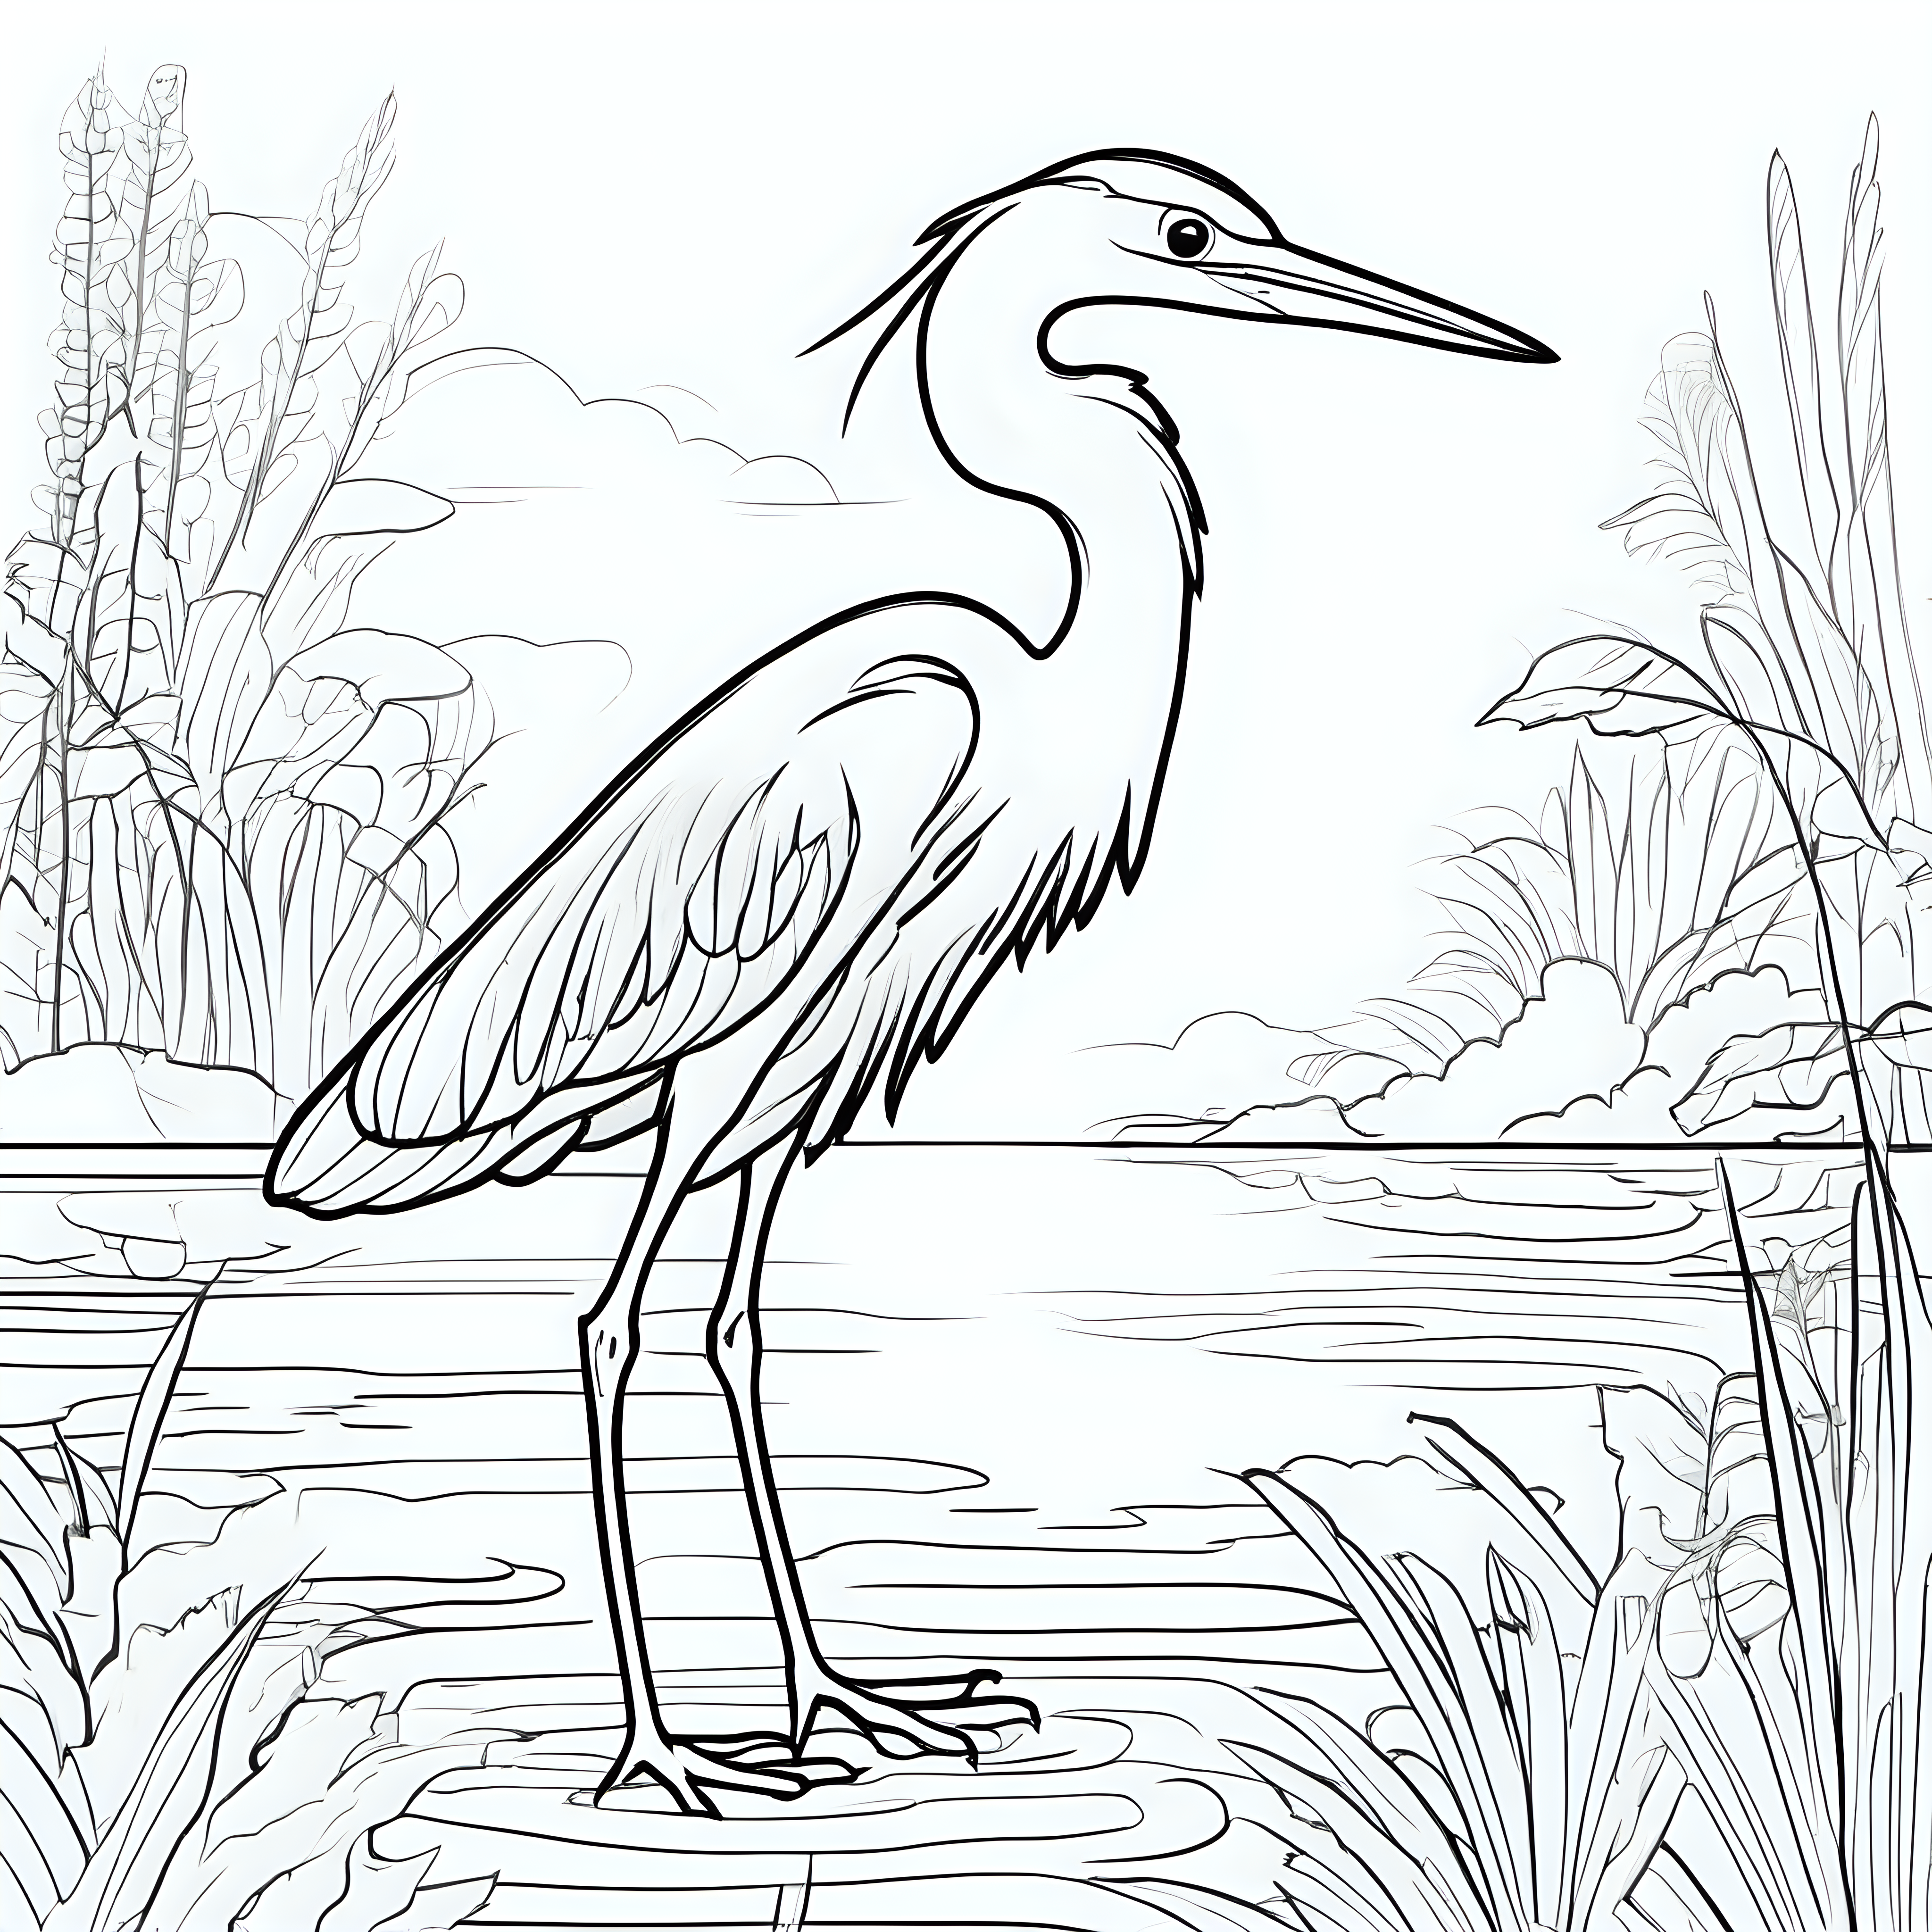 draw a cute heron with only the outline in back for a coloring book